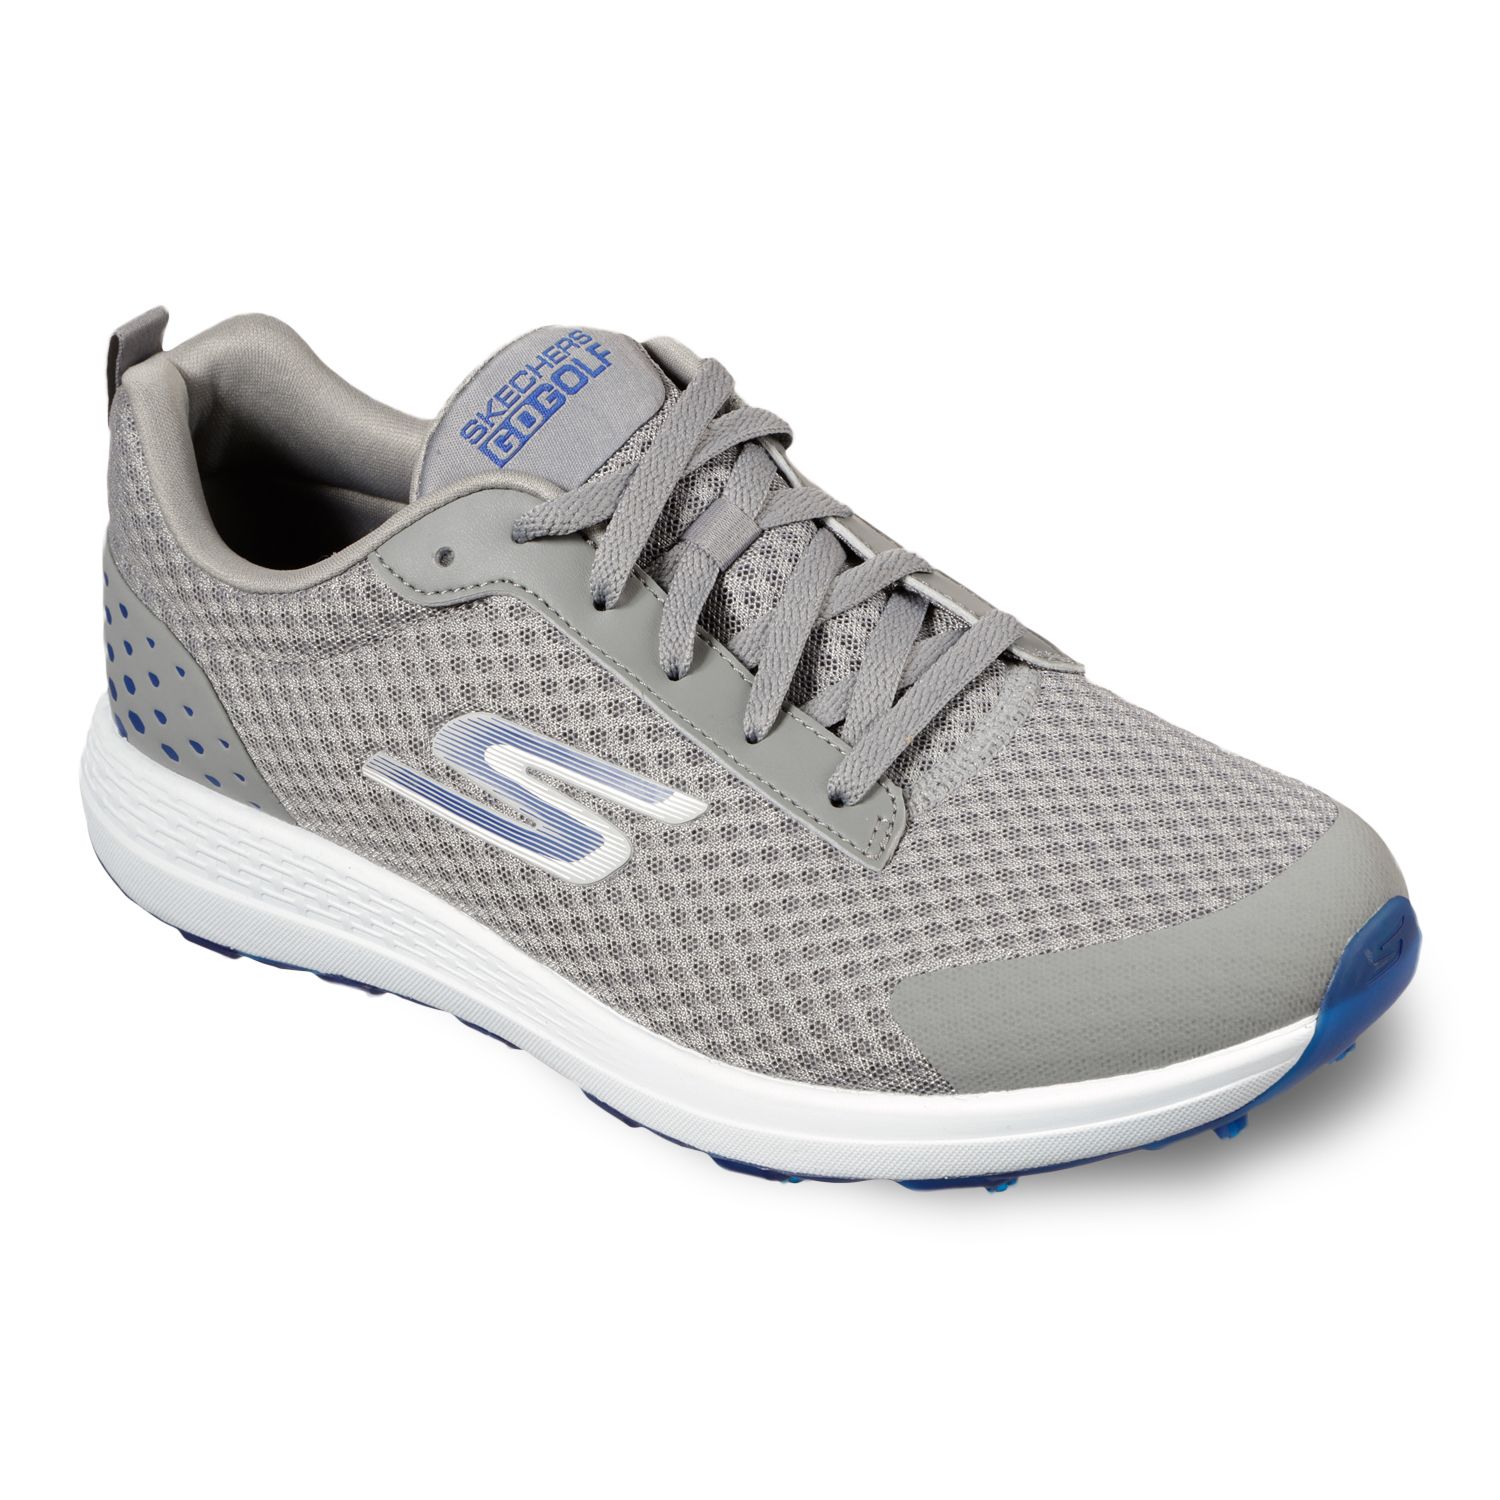 skechers go golf shoes on sale